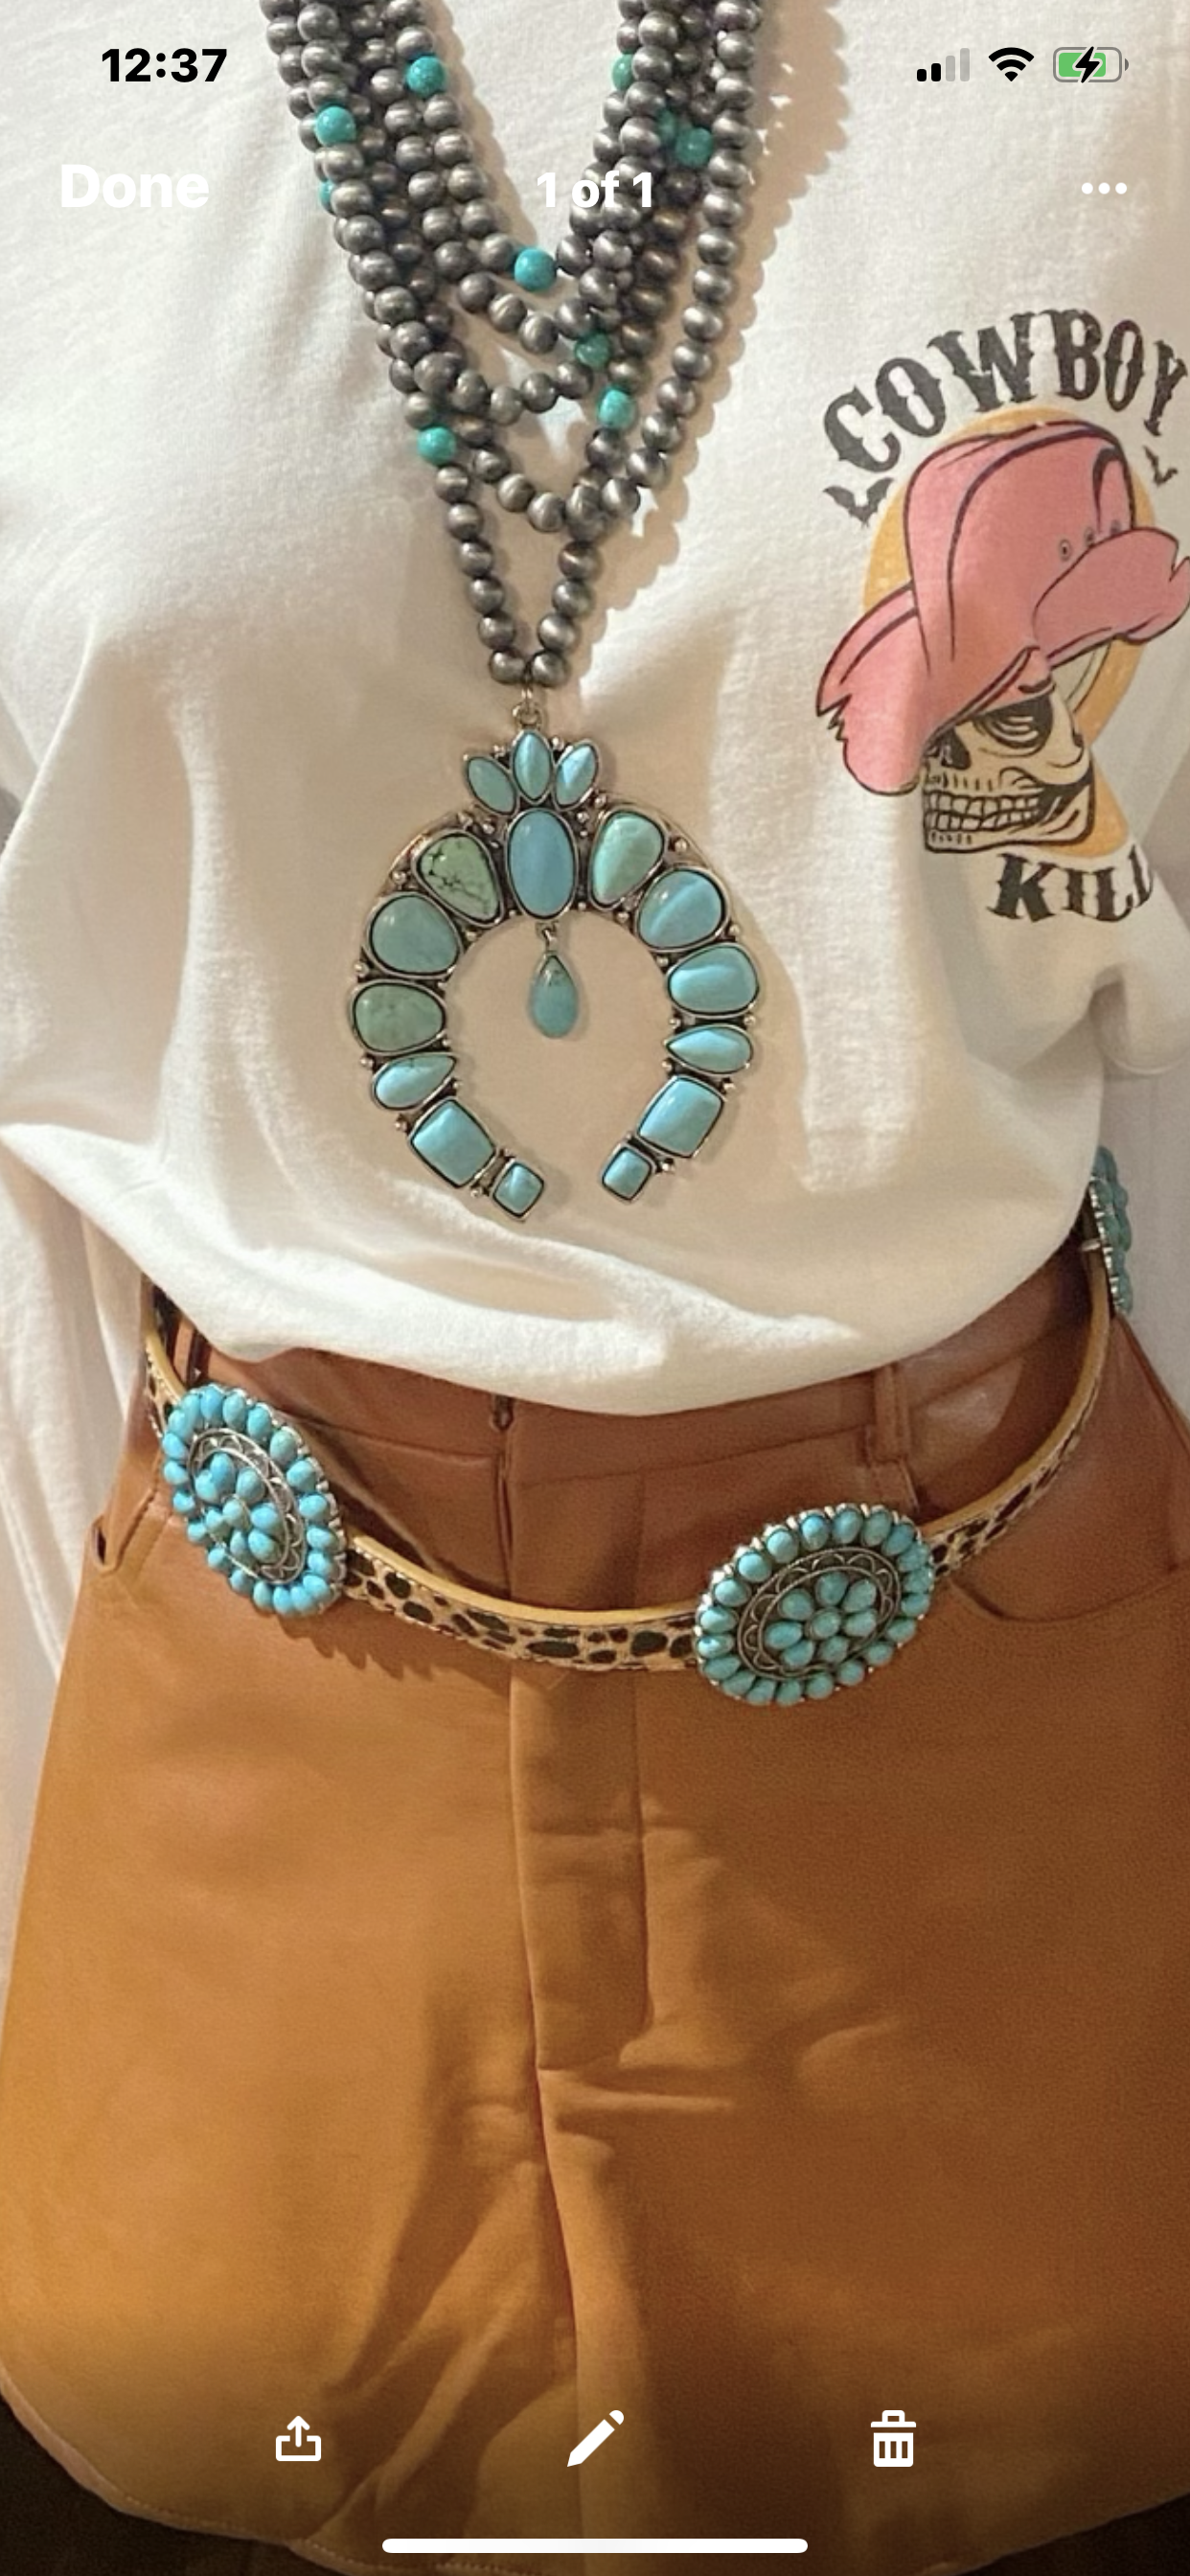 Leopard and turquoise belt